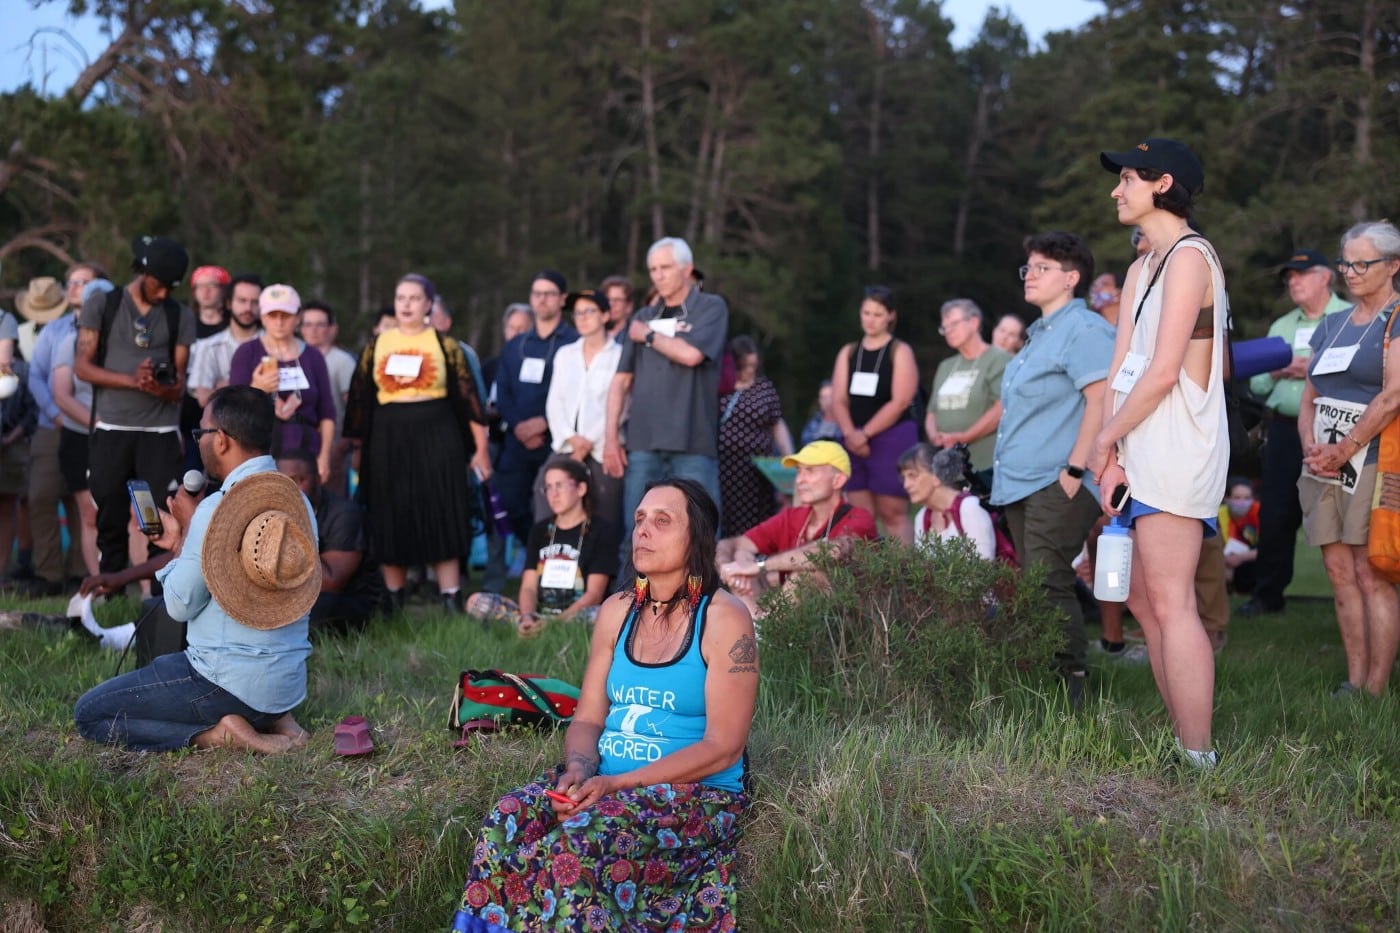 Winona LaDuke of Honor the Earth prays by the water as part of the multifaith delegation to the Stop Line 3 Treaty People Gathering. June 5, 2021.